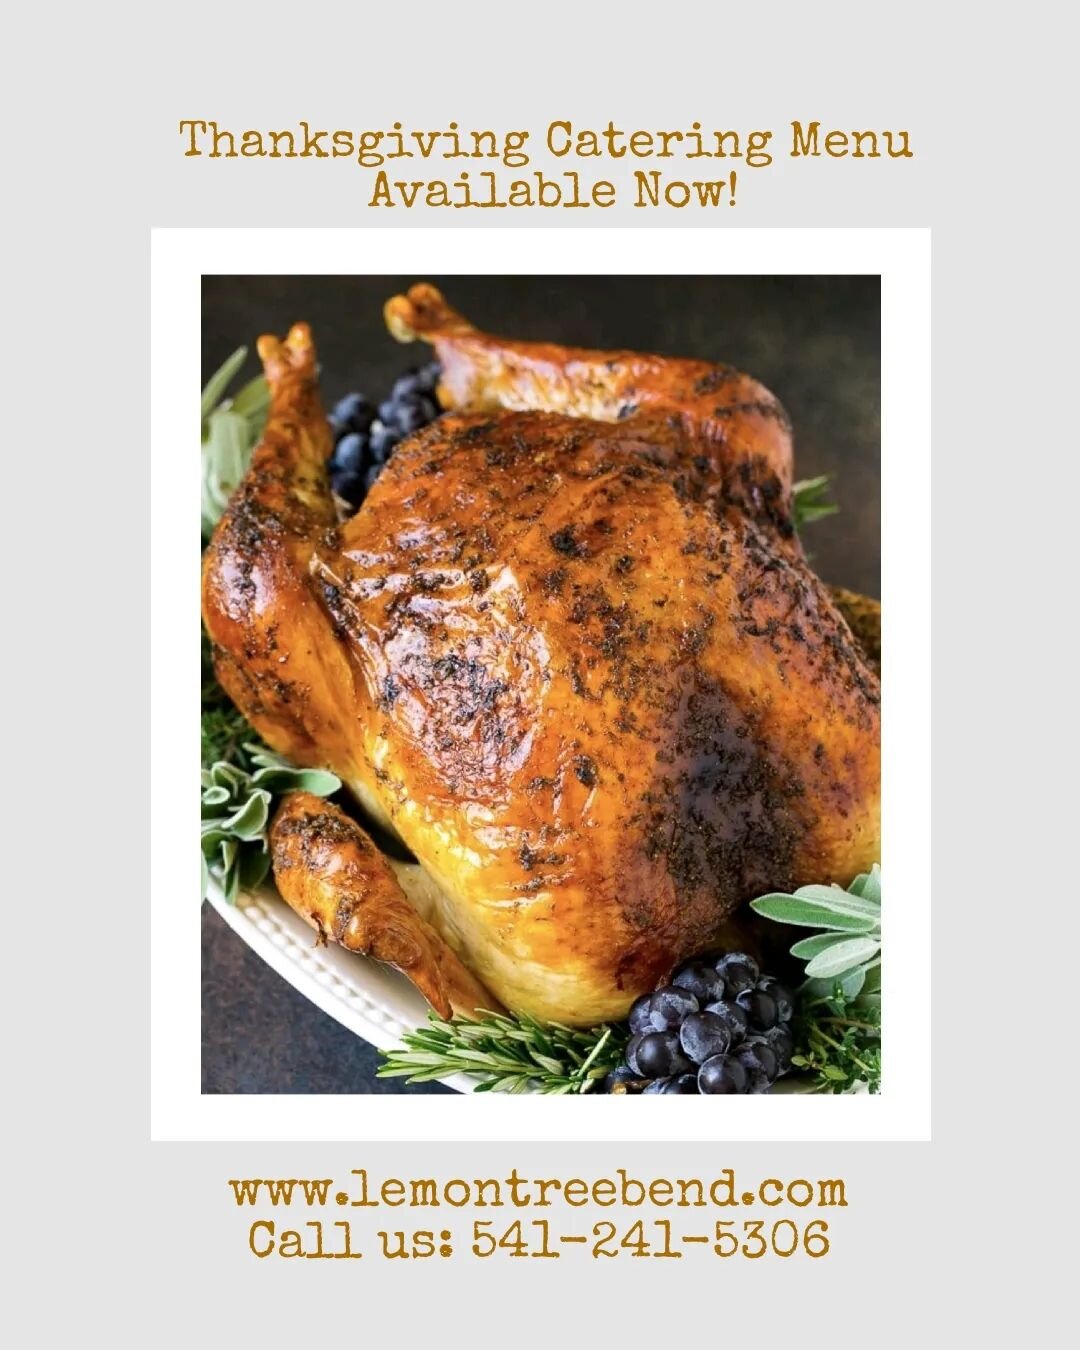 Enjoy  a beautiful Thanksgiving dinner without  lifting a finger.
Let The Lemon Tree Chefs prepare it for you and your love ones!
💗🍋
#downtownbend
#bend #bendoregon #deschutes #bendlife #bestofbend #ilovebend #amazing #beautiful #foodandwine #foodi